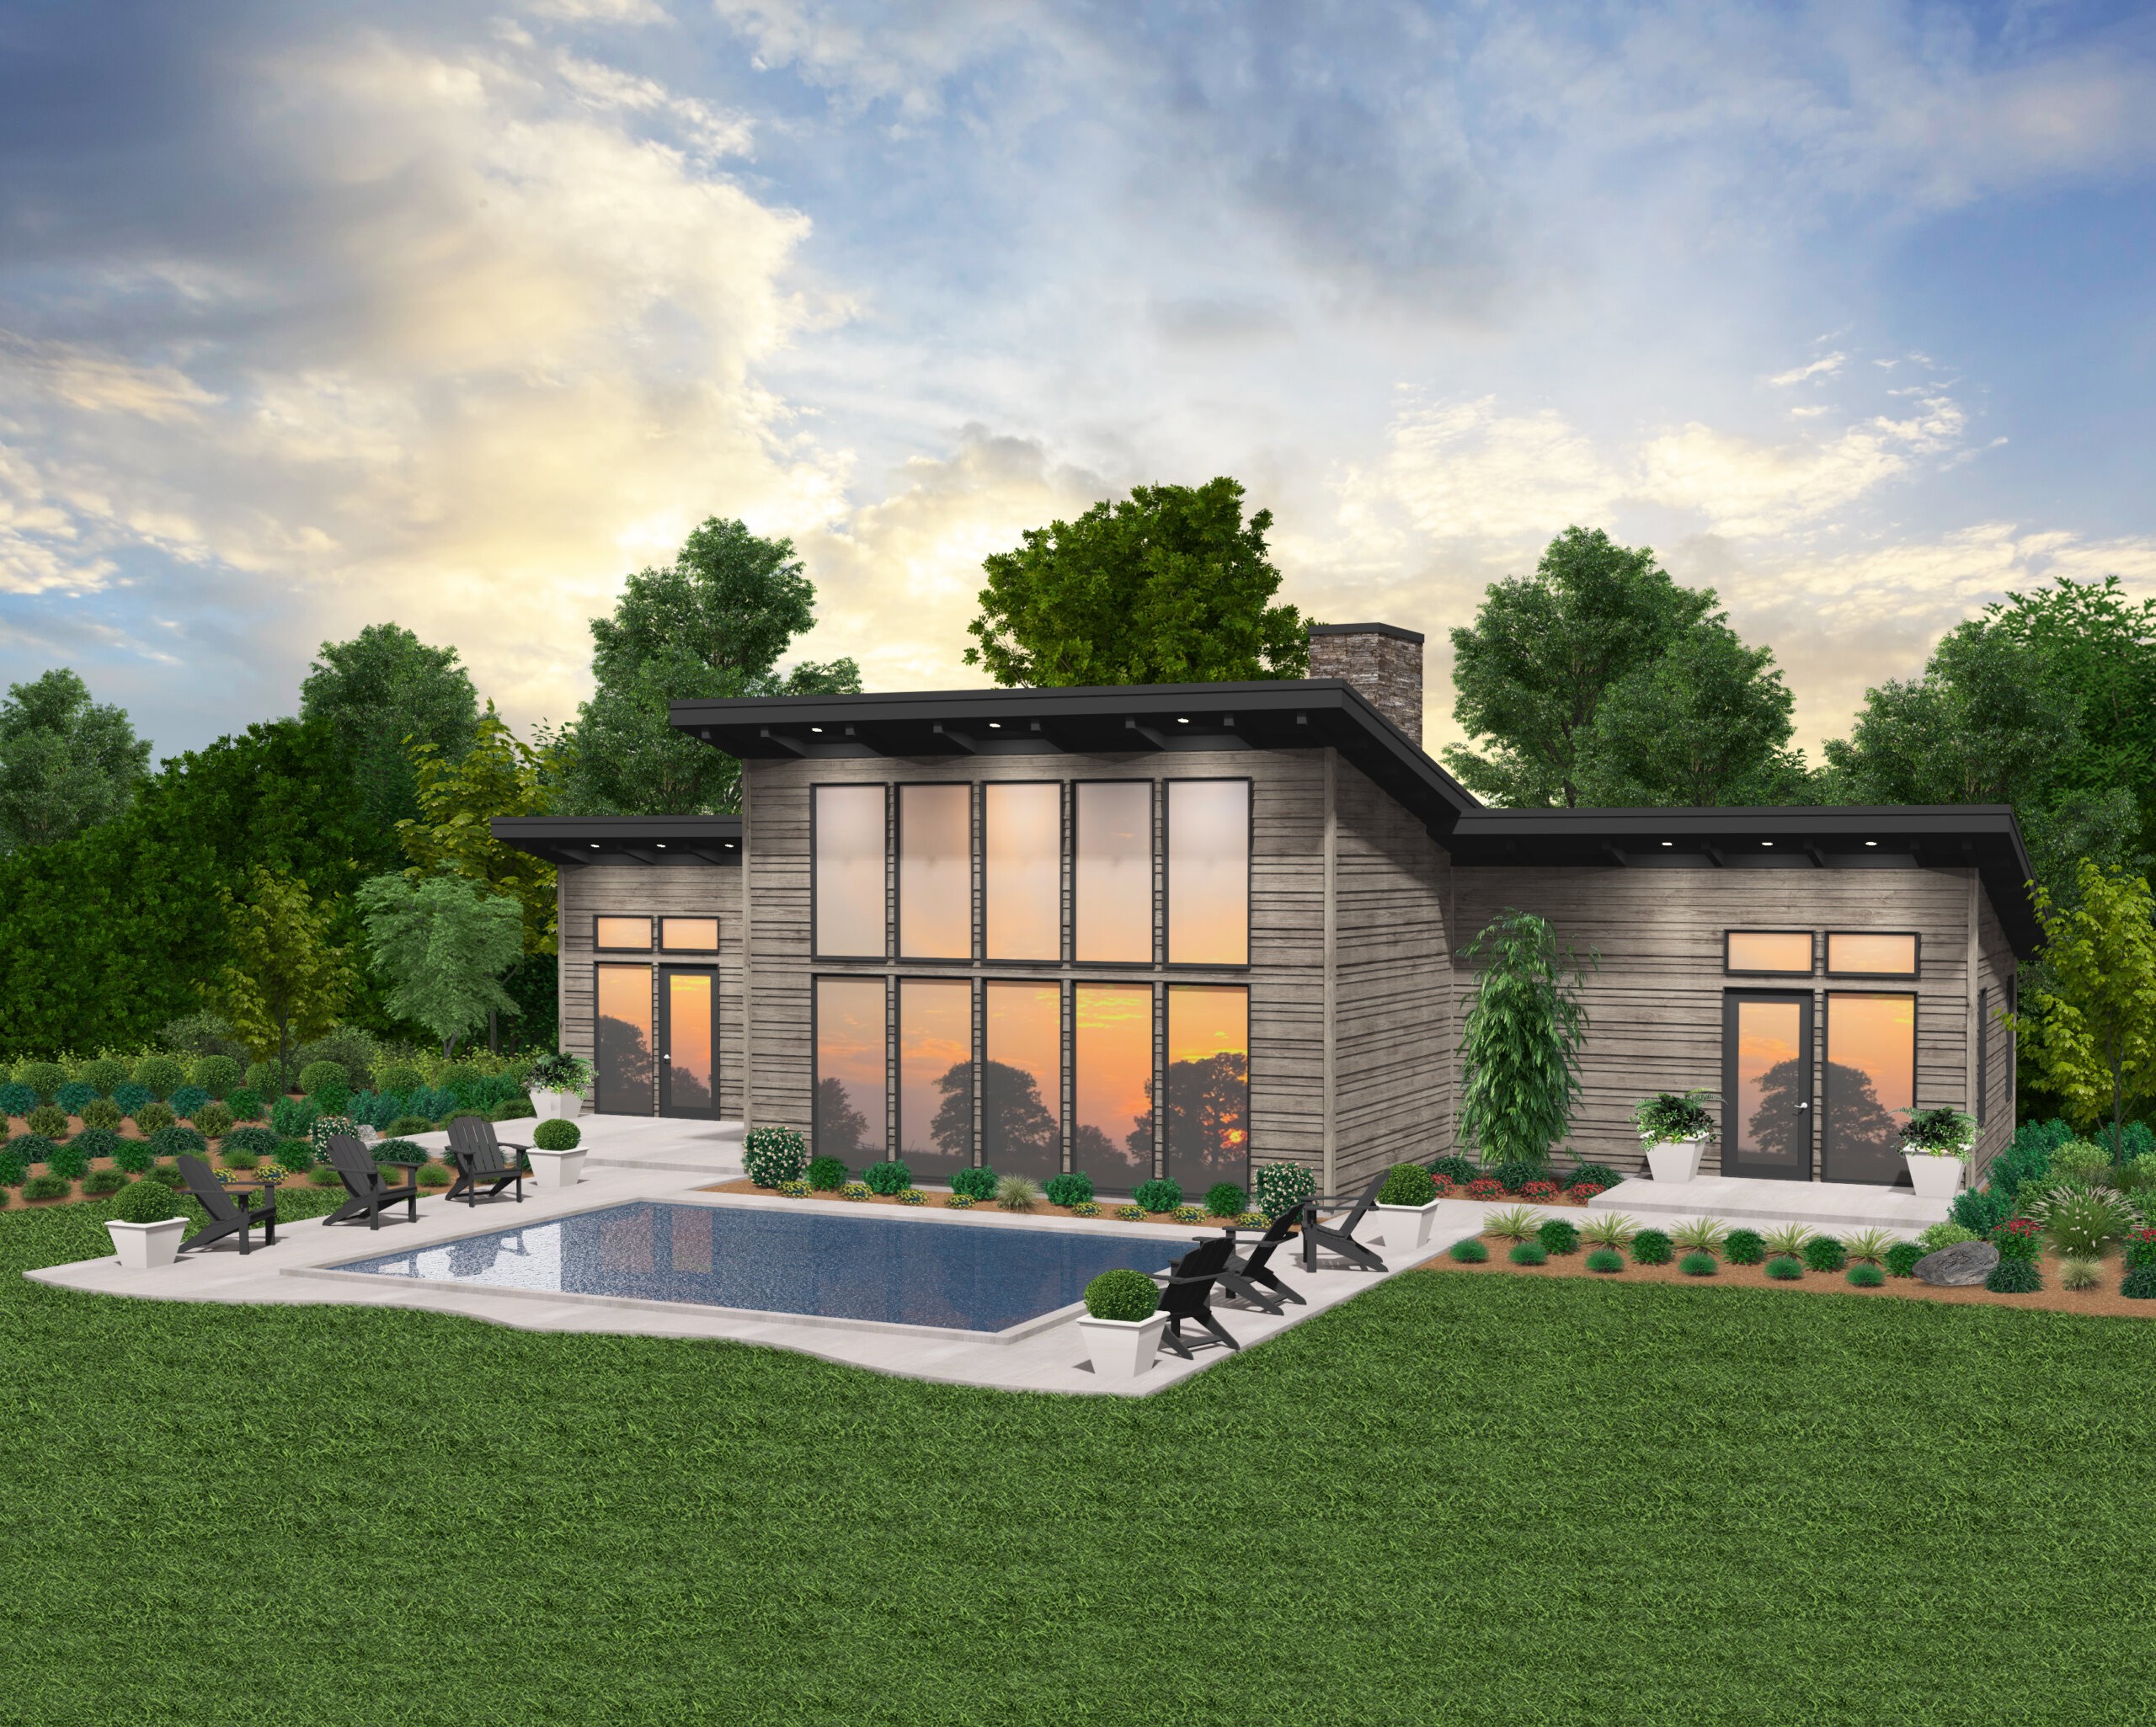 MODERN HOUSE PLAN MM 1439 S SILK REAR VIEW scaled